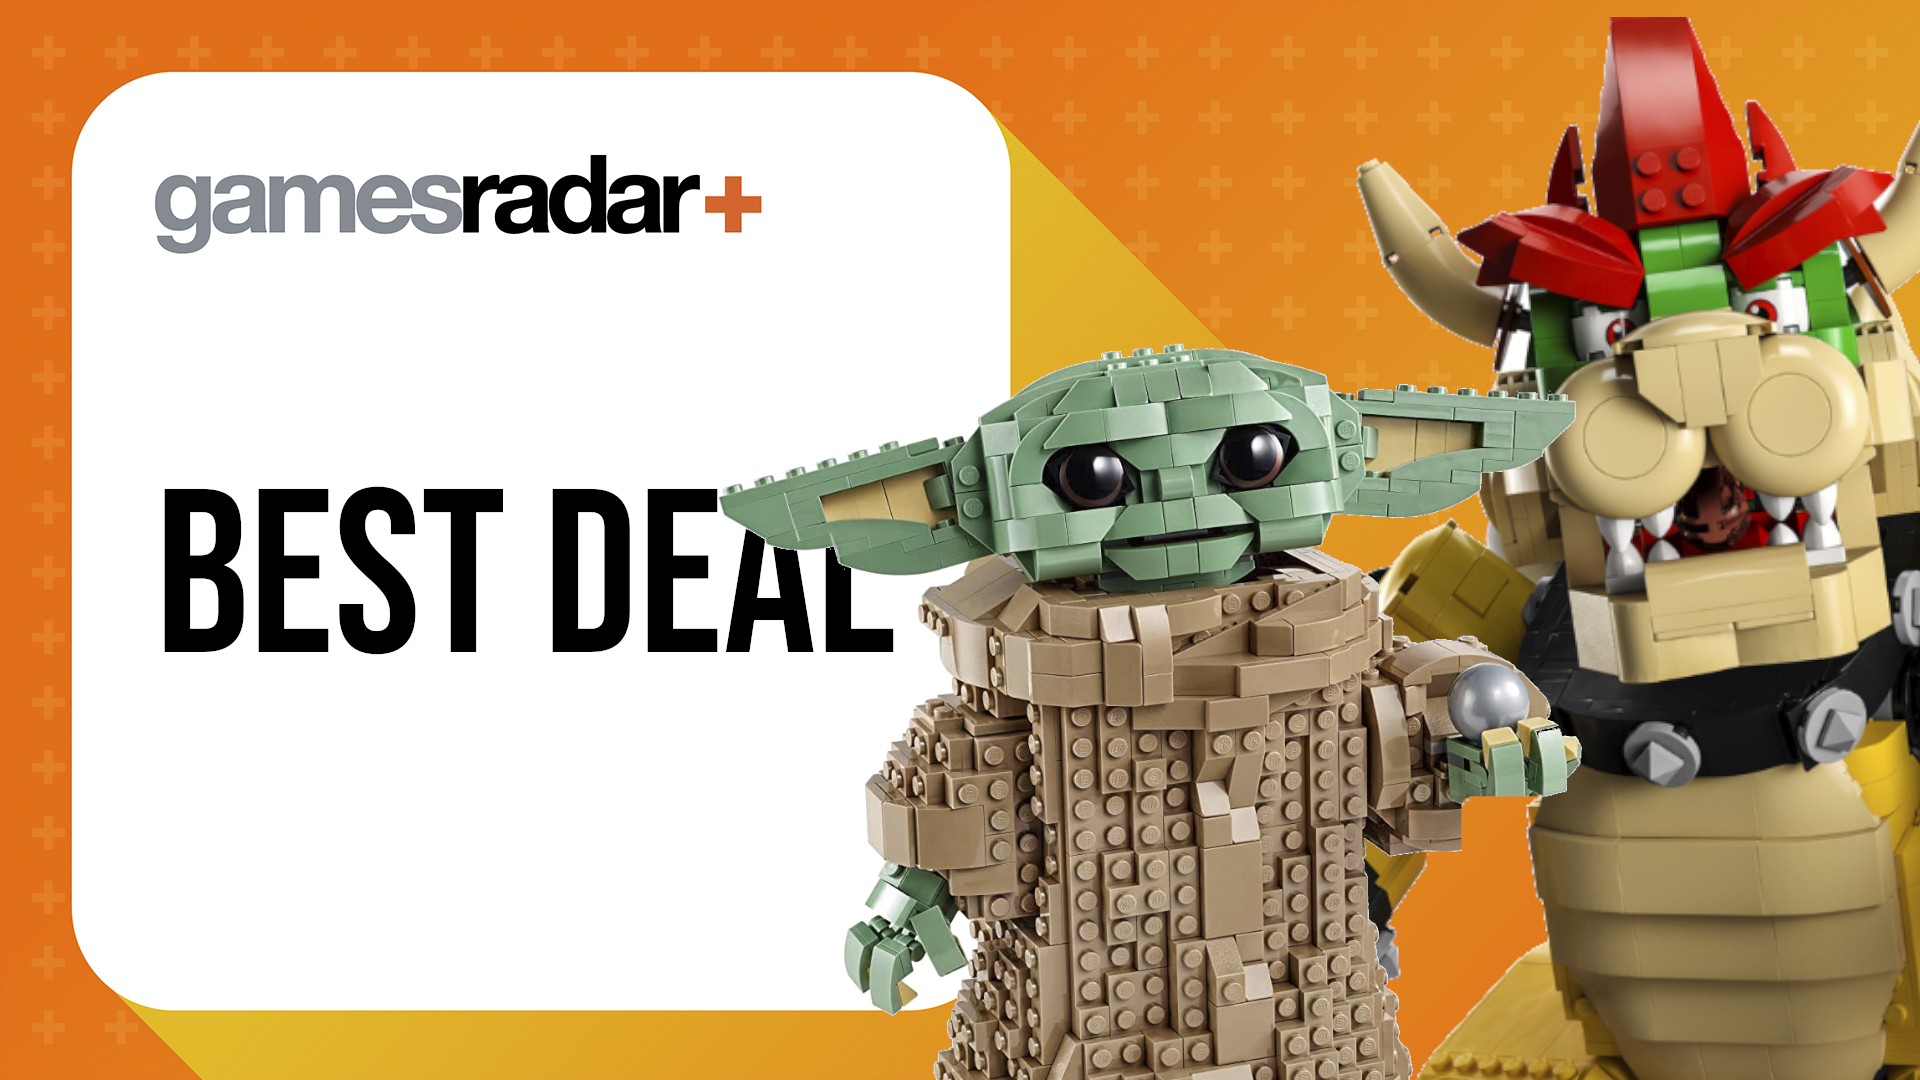 Black Friday Lego deals with Baby Yoda and The Mighty Bowser